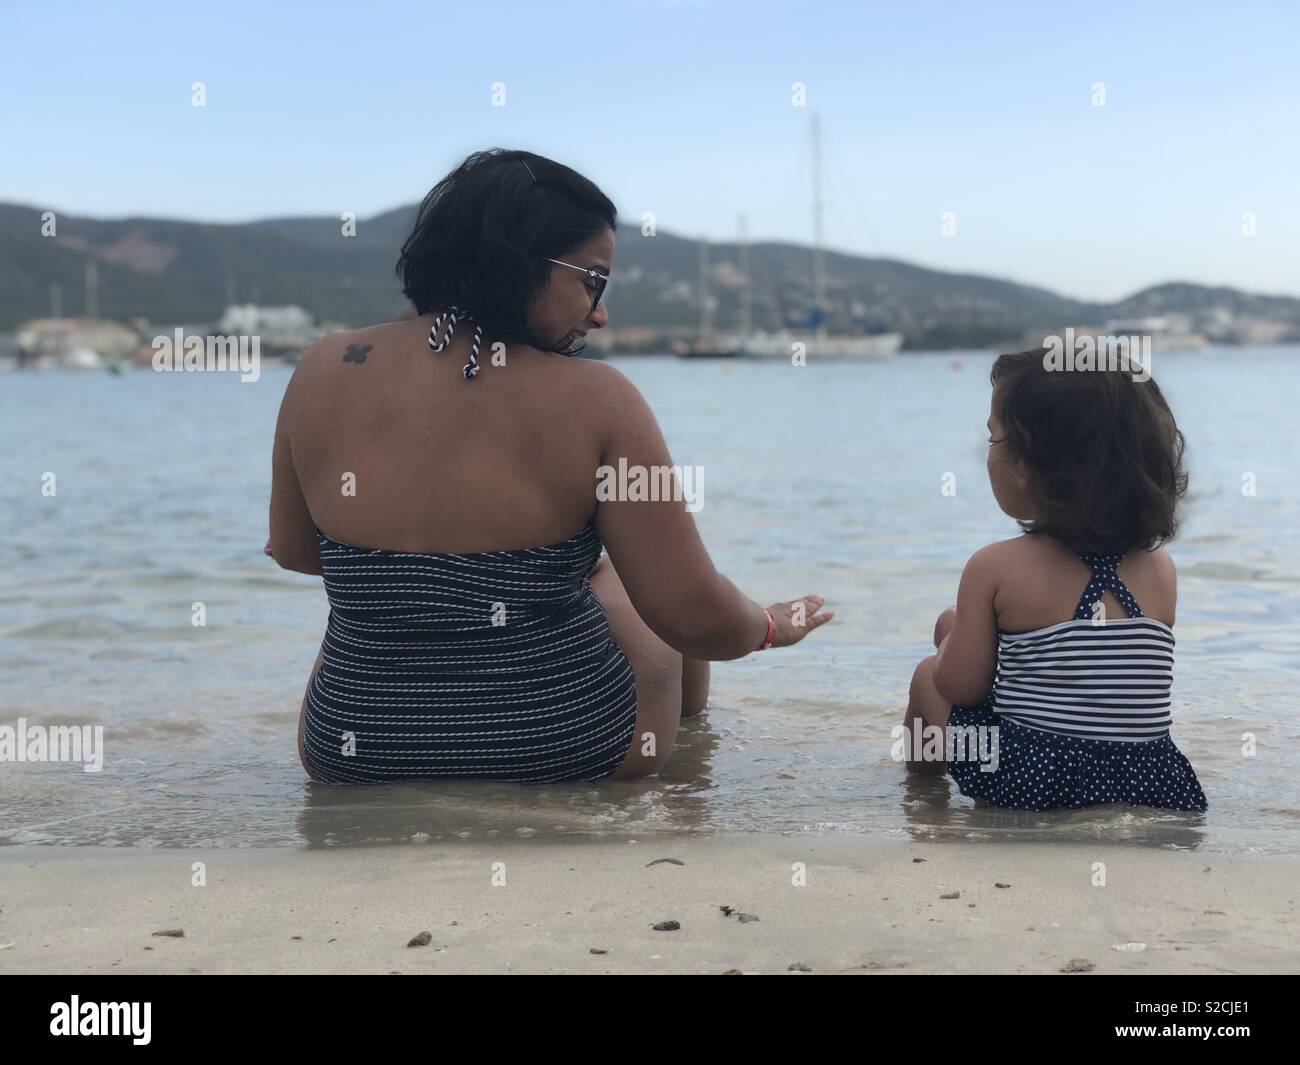 Contemplating life - Mother & Daughter Moment Stock Photo